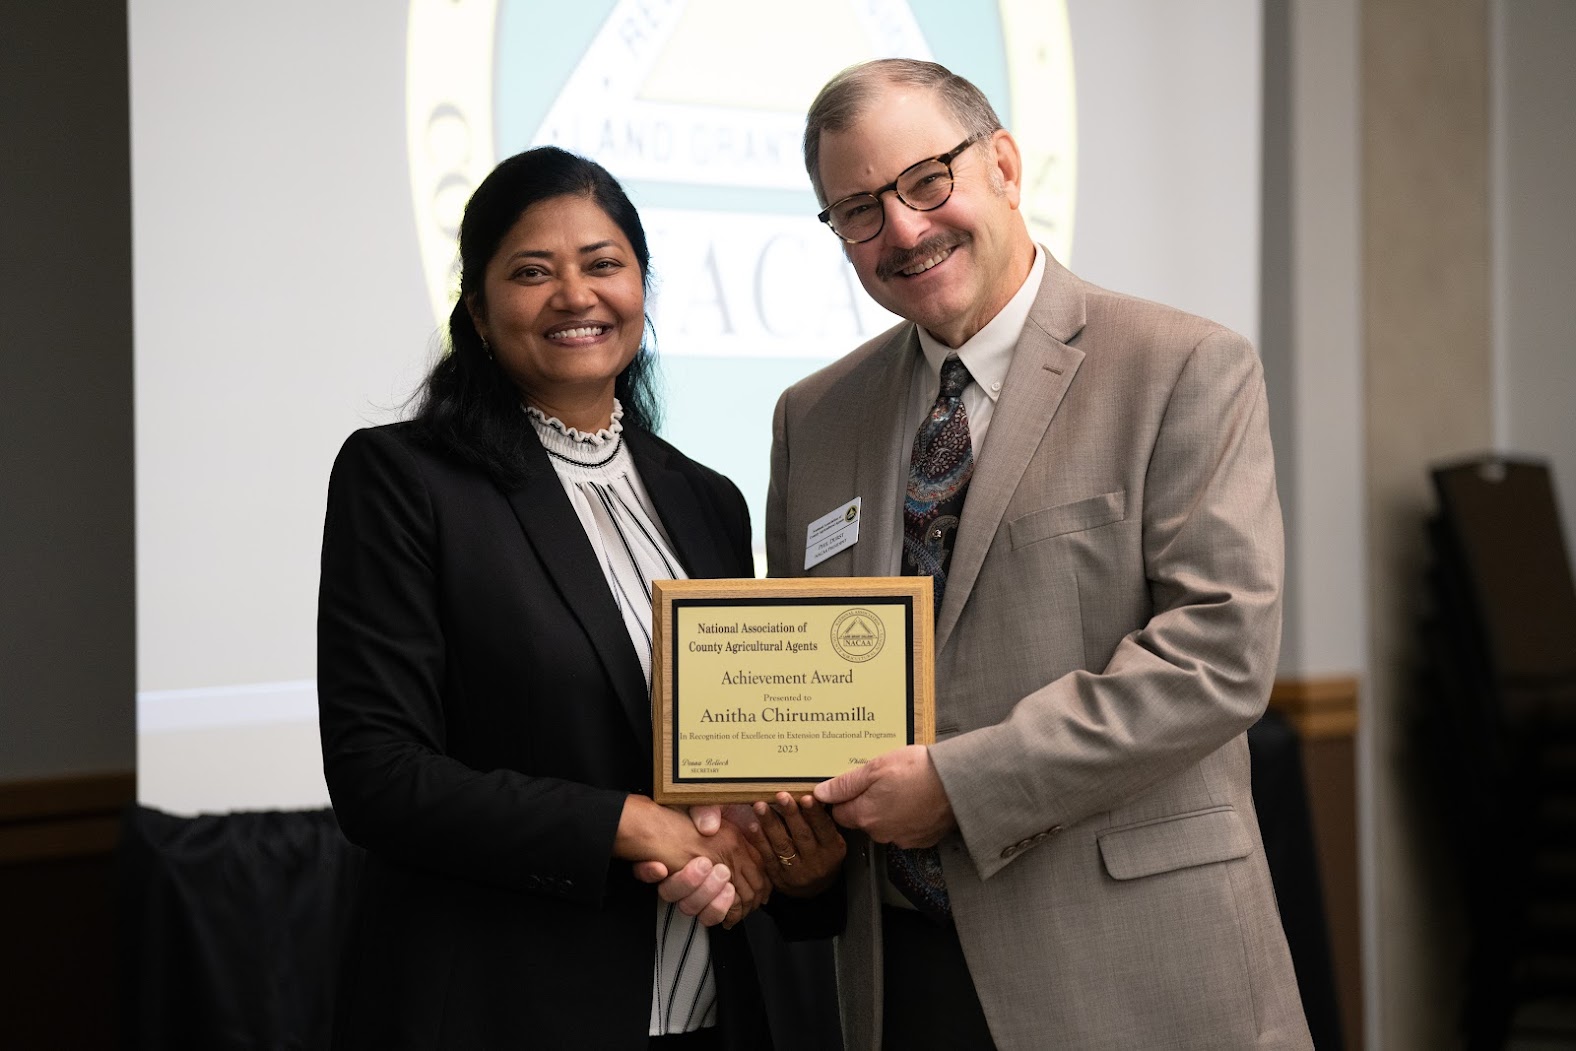 Anitha Chirumamilla, Extension cropping systems specialist at the NDSU Langdon Research Extension Center, receives the National Achievement Award at the National Association of County Agricultural Agents conference. (NDSU photo)